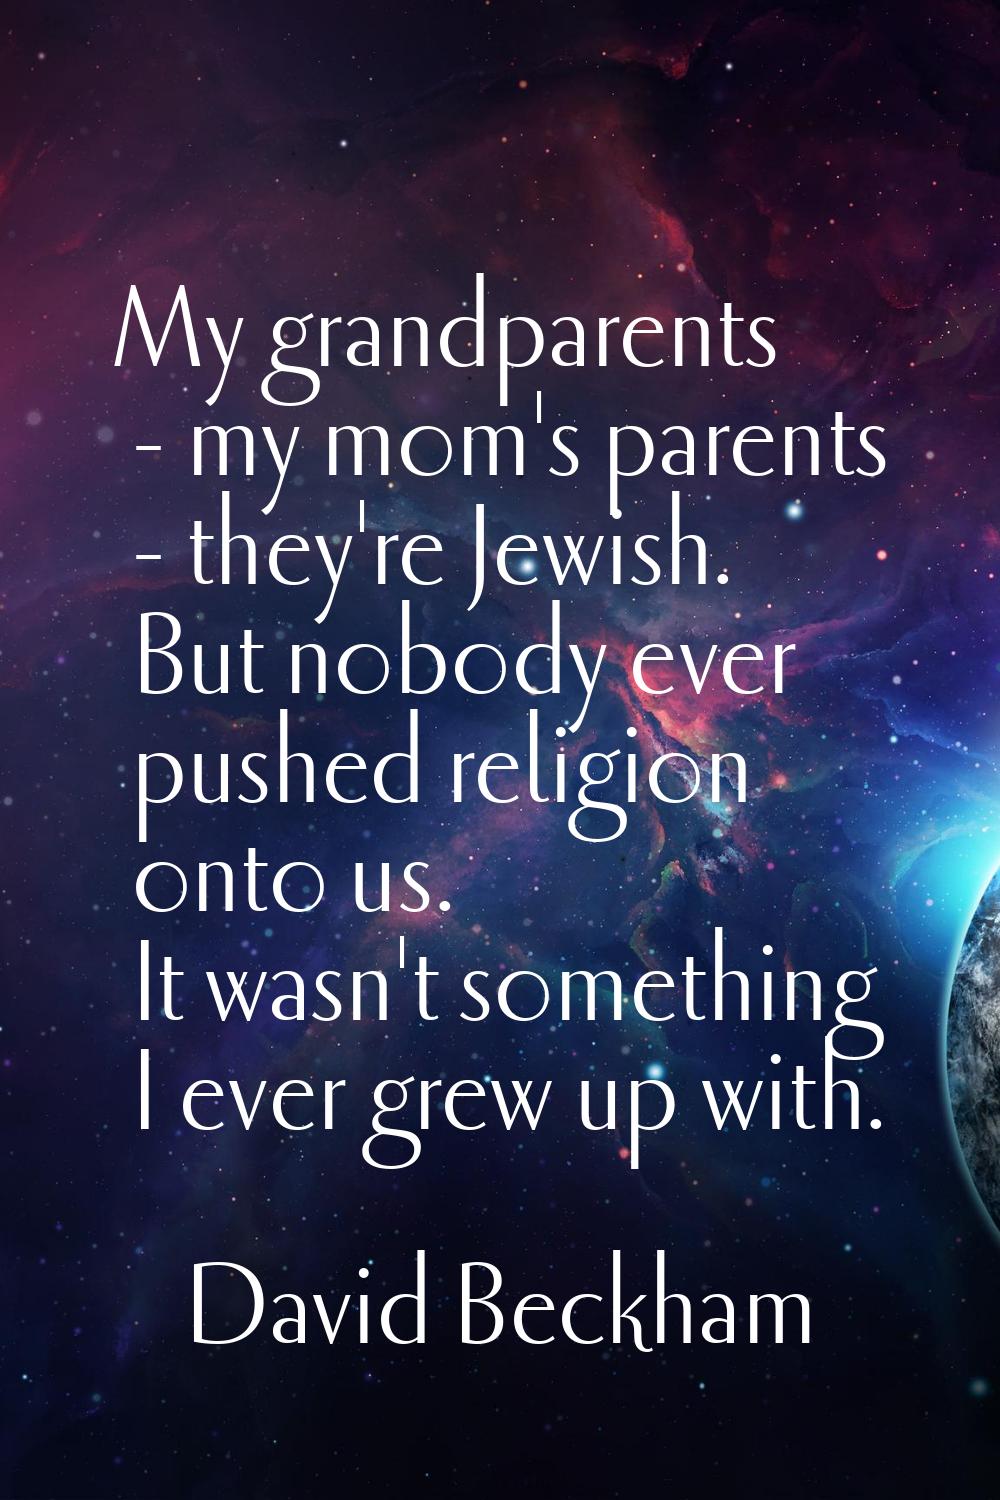 My grandparents - my mom's parents - they're Jewish. But nobody ever pushed religion onto us. It wa